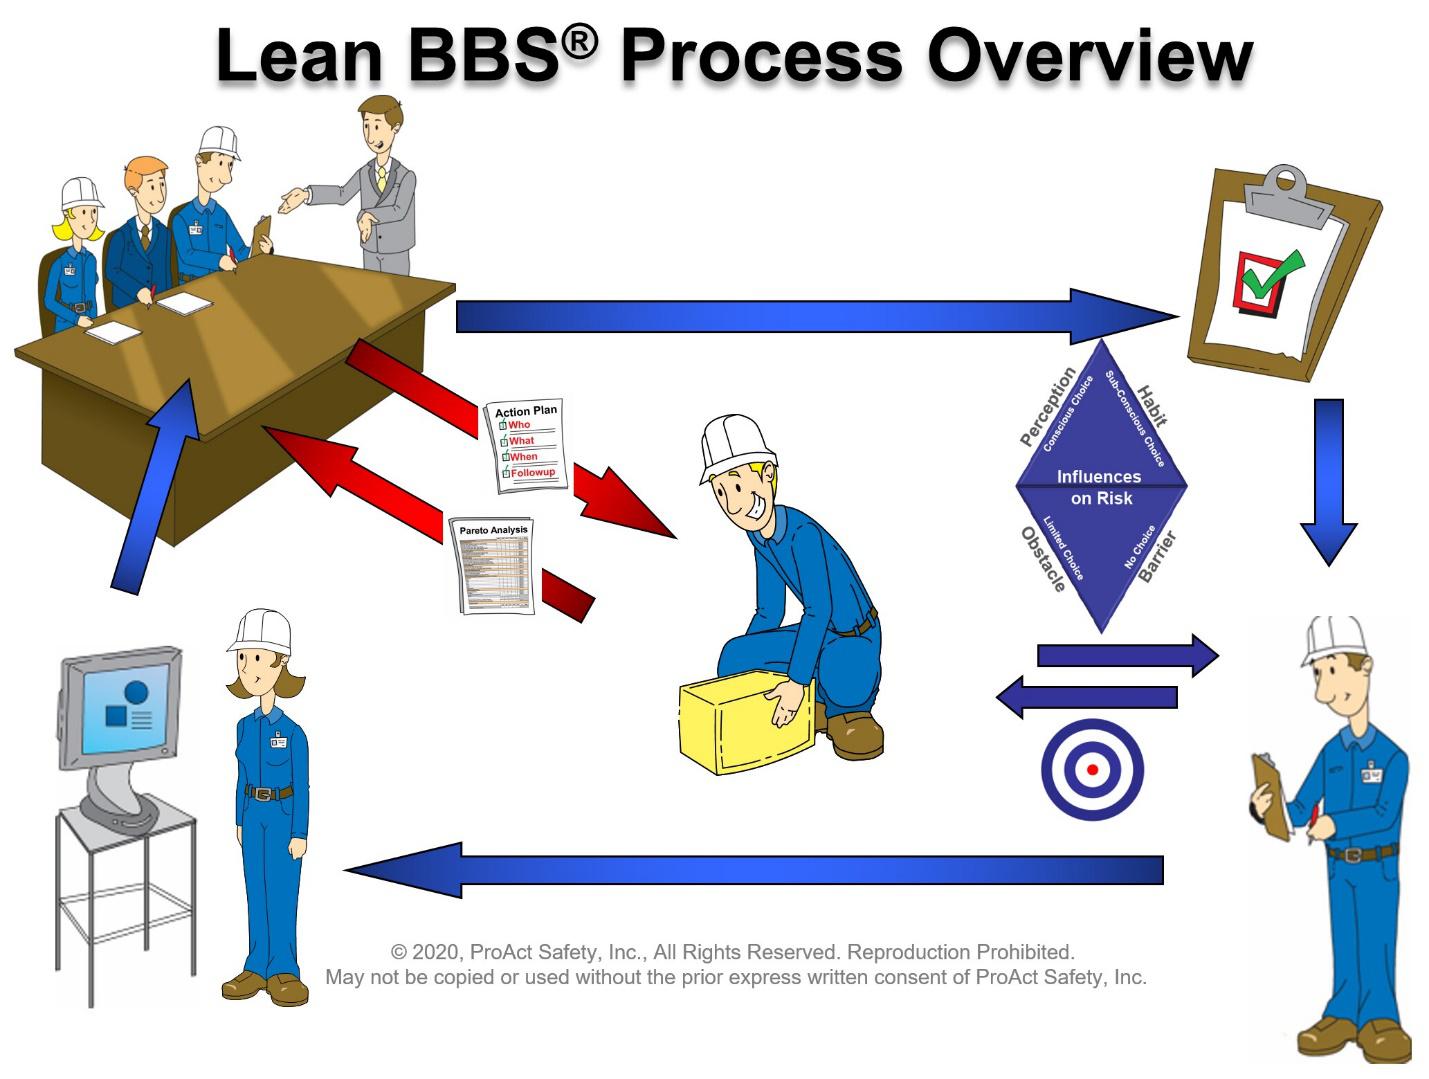 Process overview flow chart